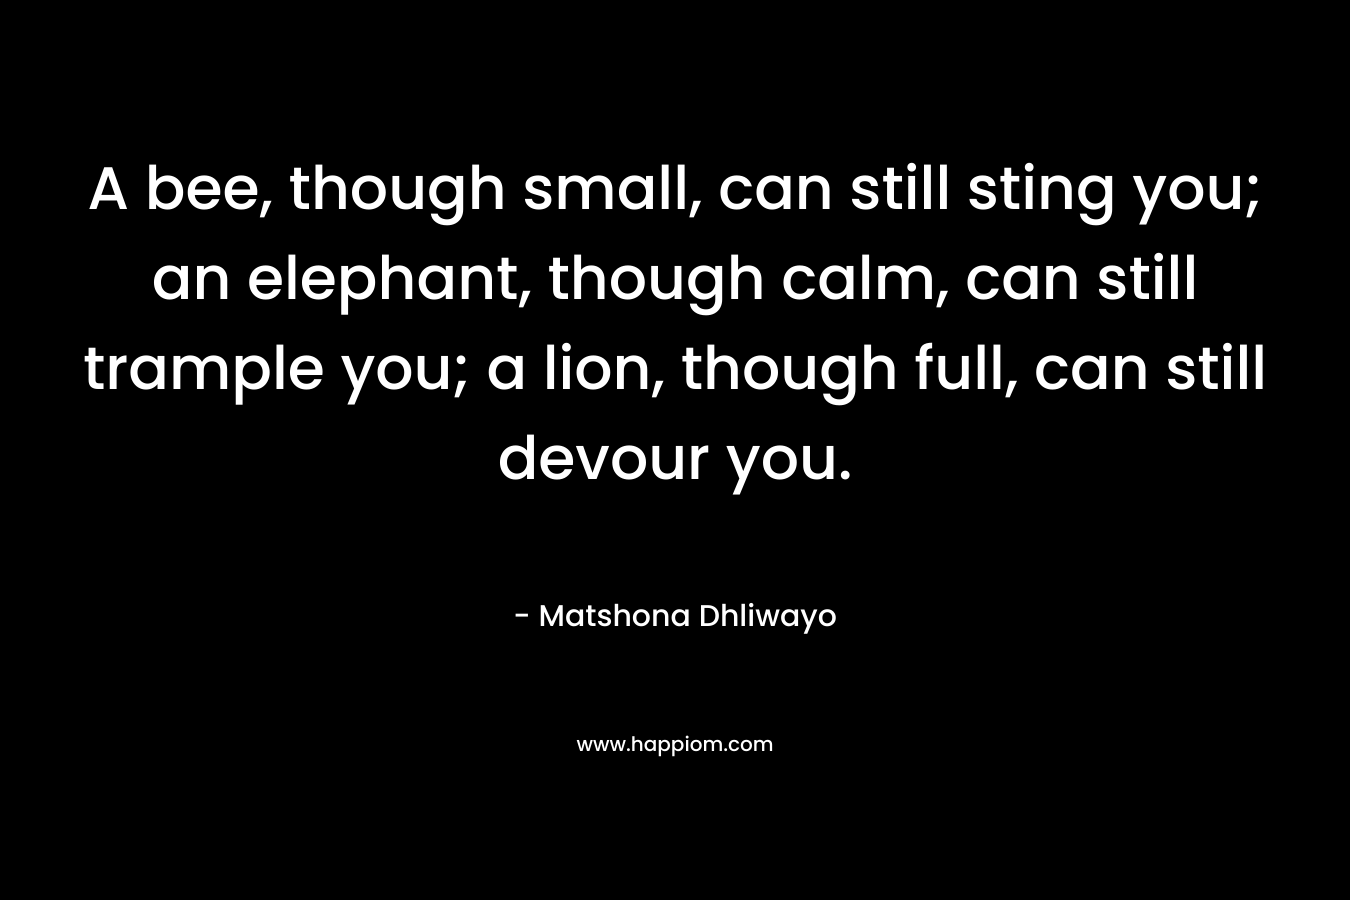 A bee, though small, can still sting you; an elephant, though calm, can still trample you; a lion, though full, can still devour you. – Matshona Dhliwayo